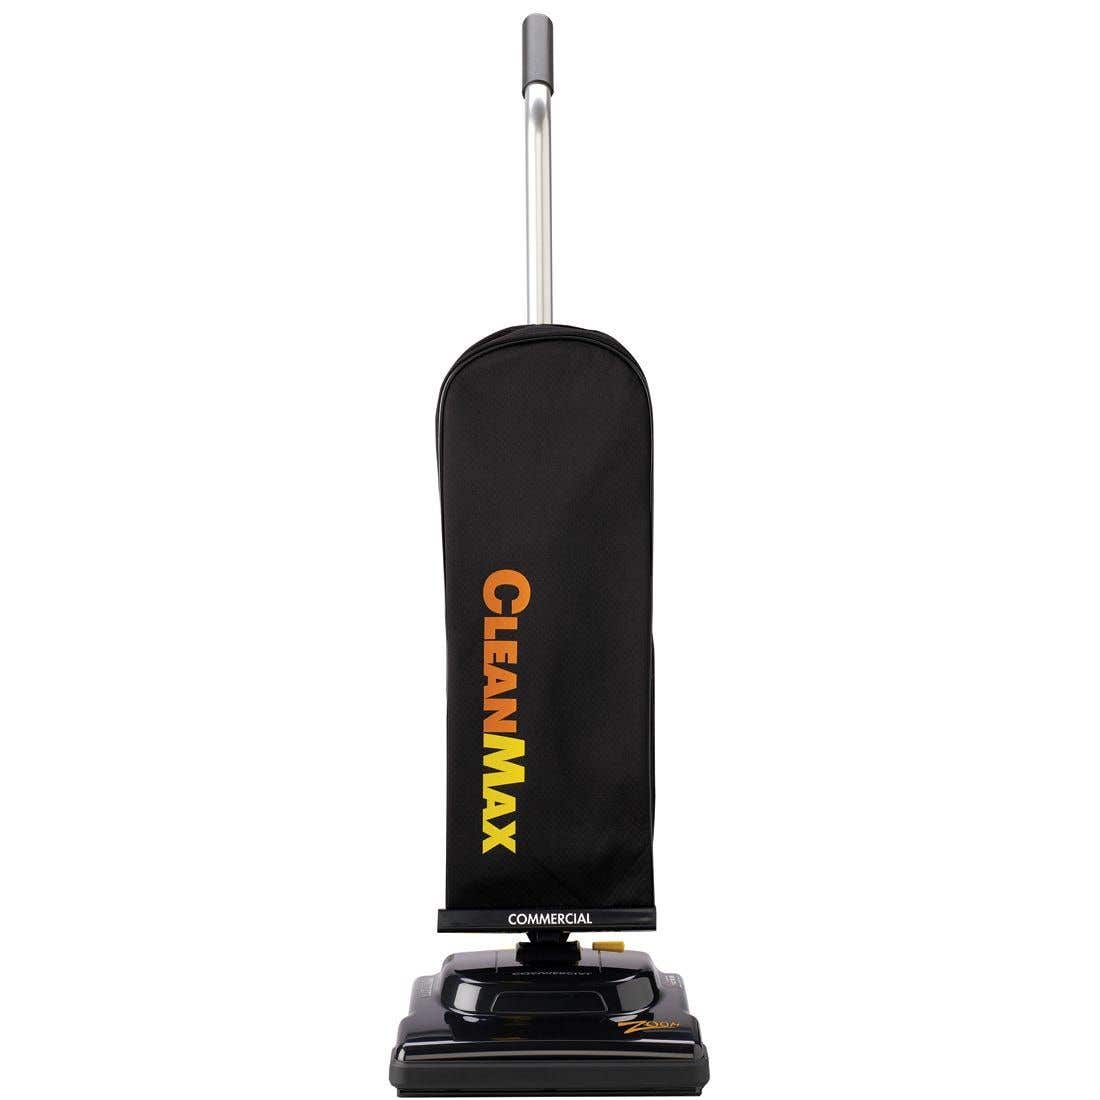 CleanMax Zoom 200 Ultra Light Weight Commercial Vacuum CleanMax, Zoom, Ultra, Light, Weight, Cordless, Vacuum, clean, max, metal, brushroll, brush, roll, 